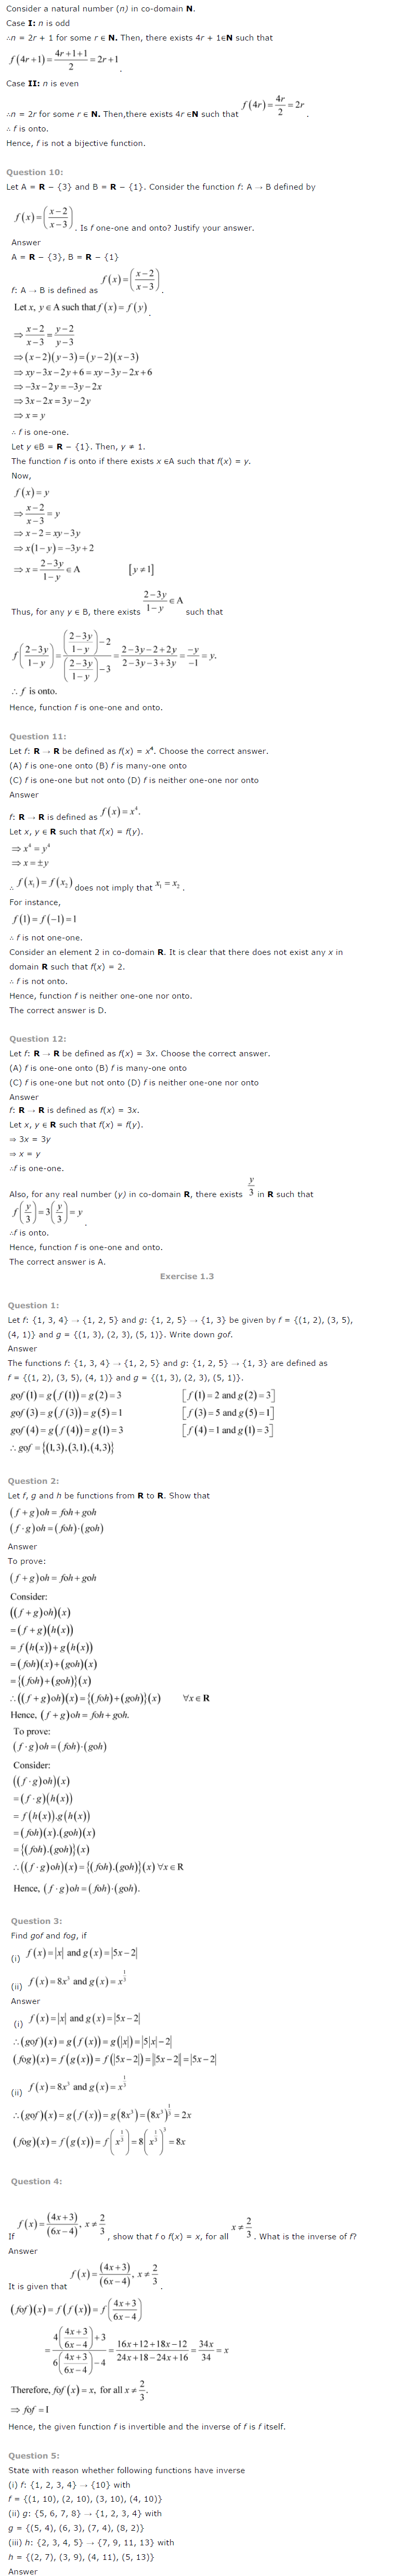 NCERT Solutions For Class 12 Maths Chapter 1 Relations and Functions-5